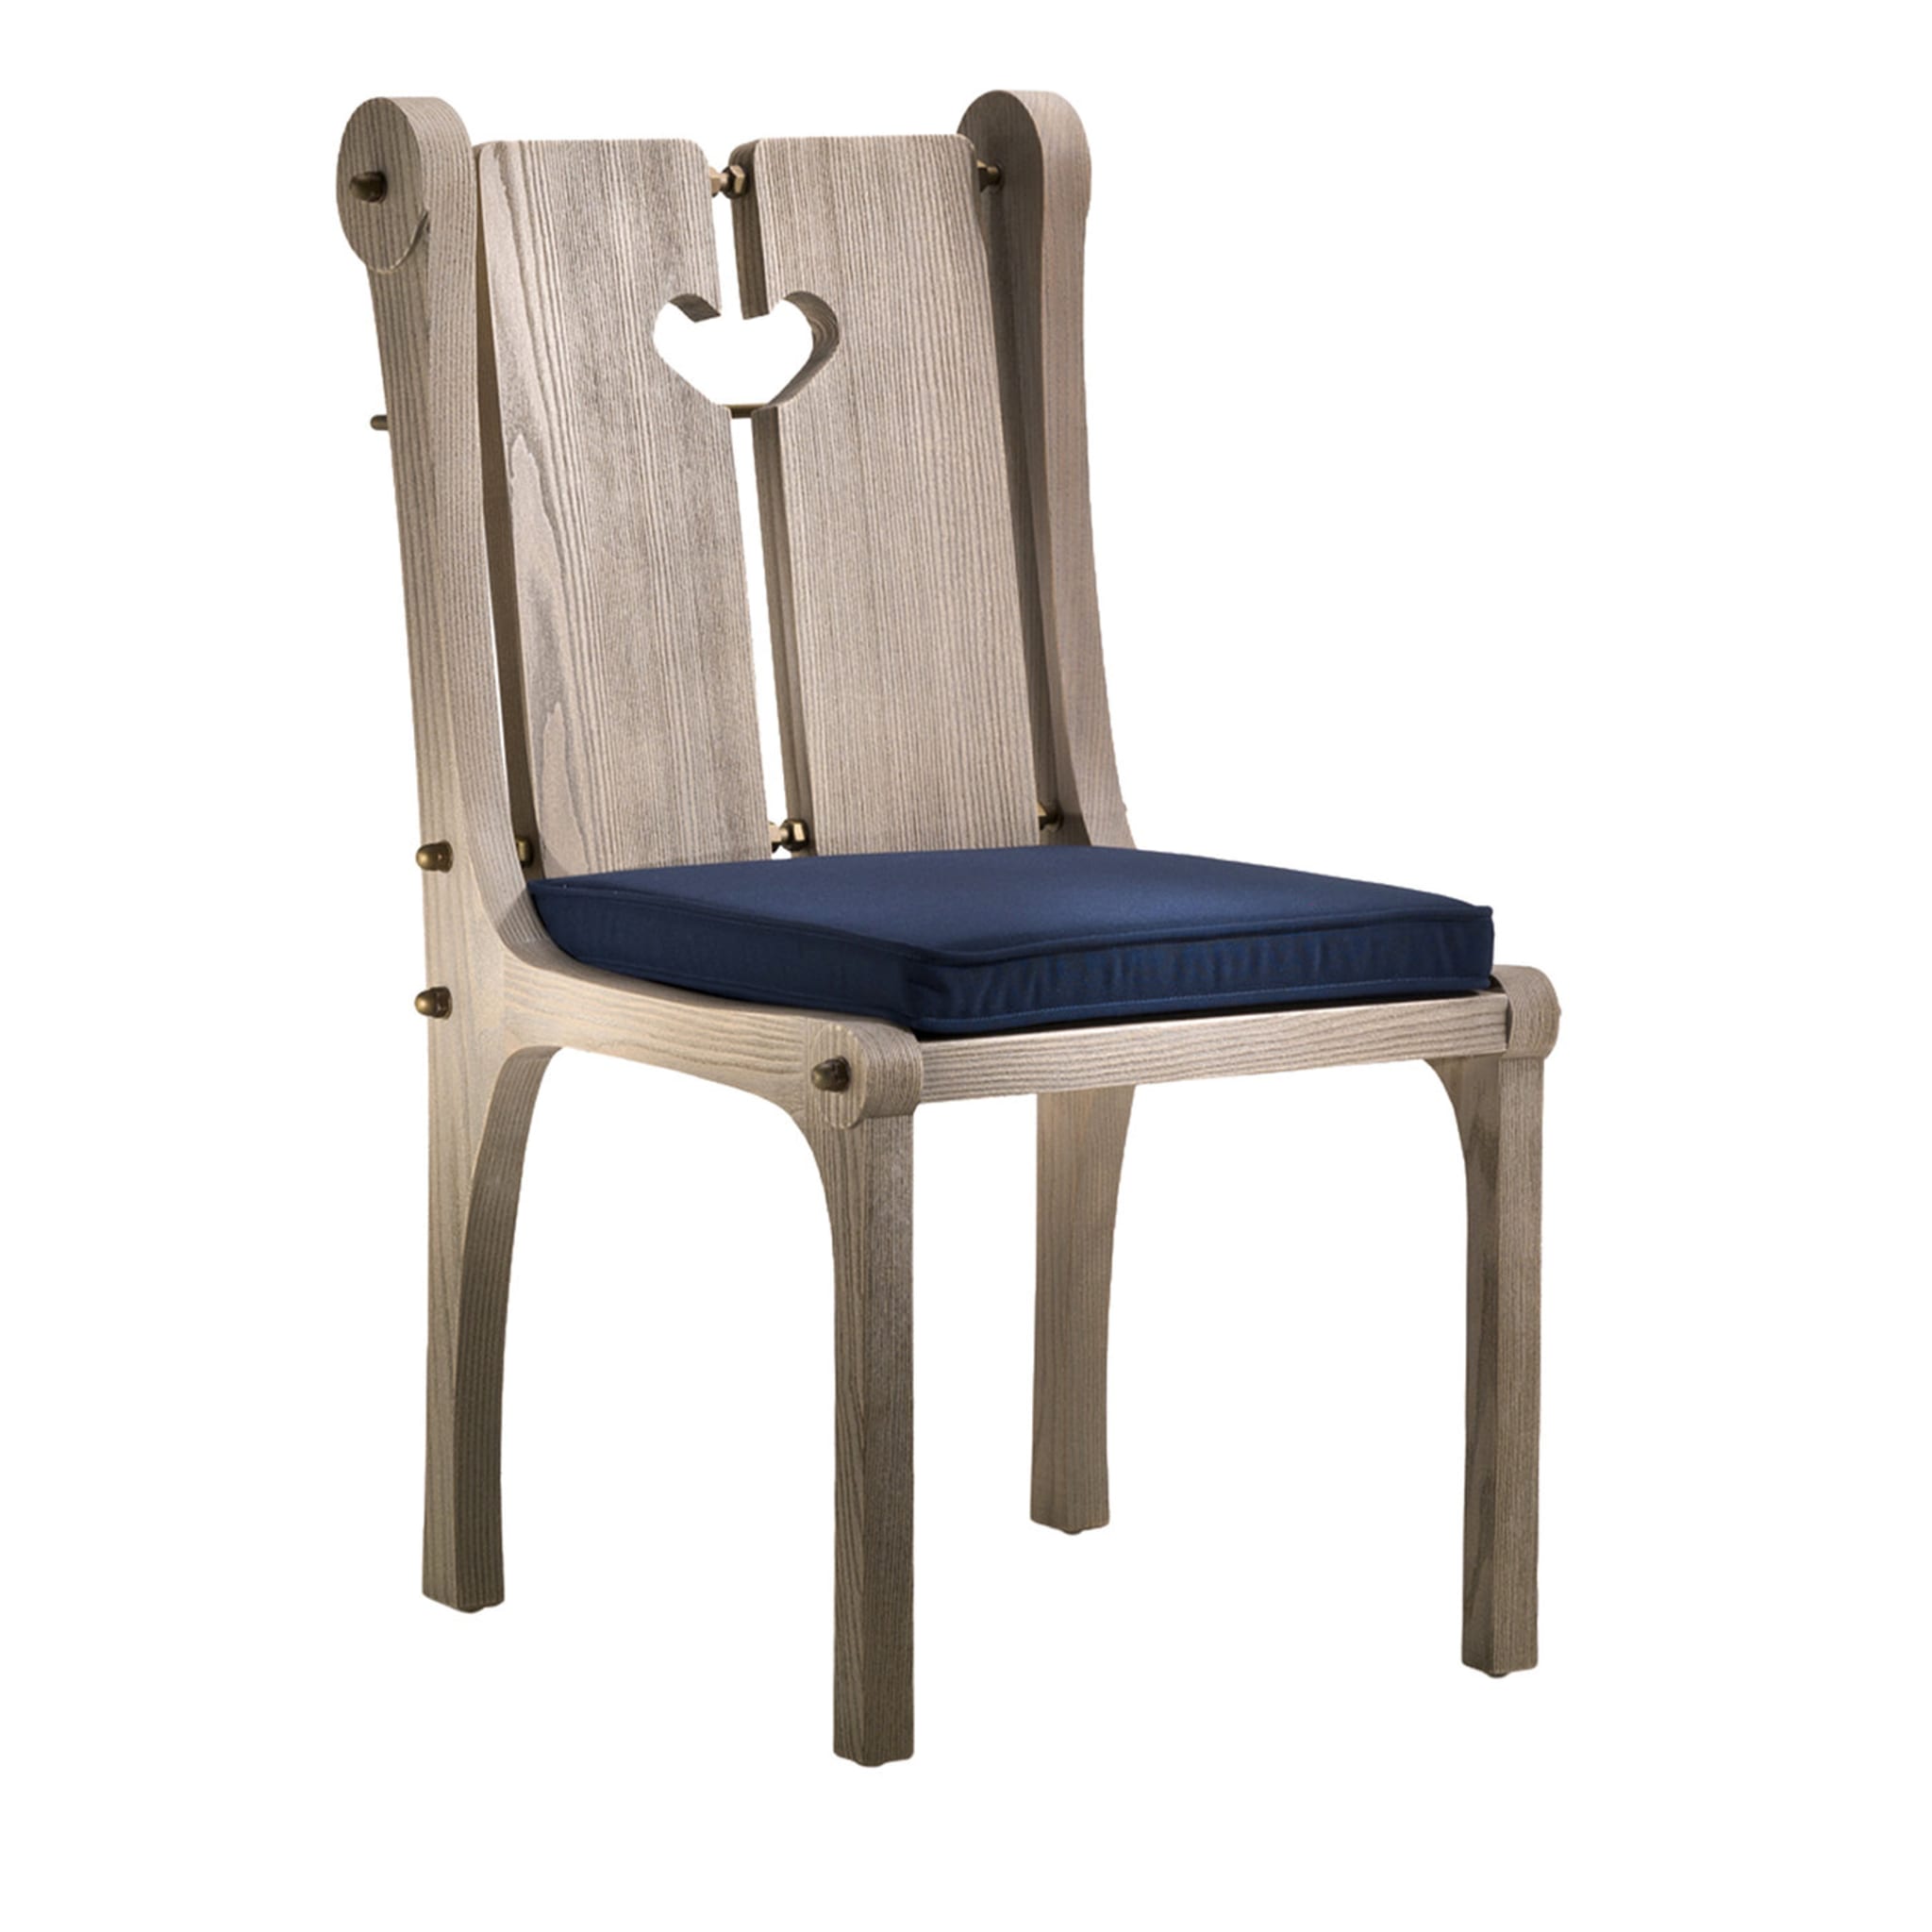 Toula Outdoor Chair by Archer Humphryes Architects - Main view